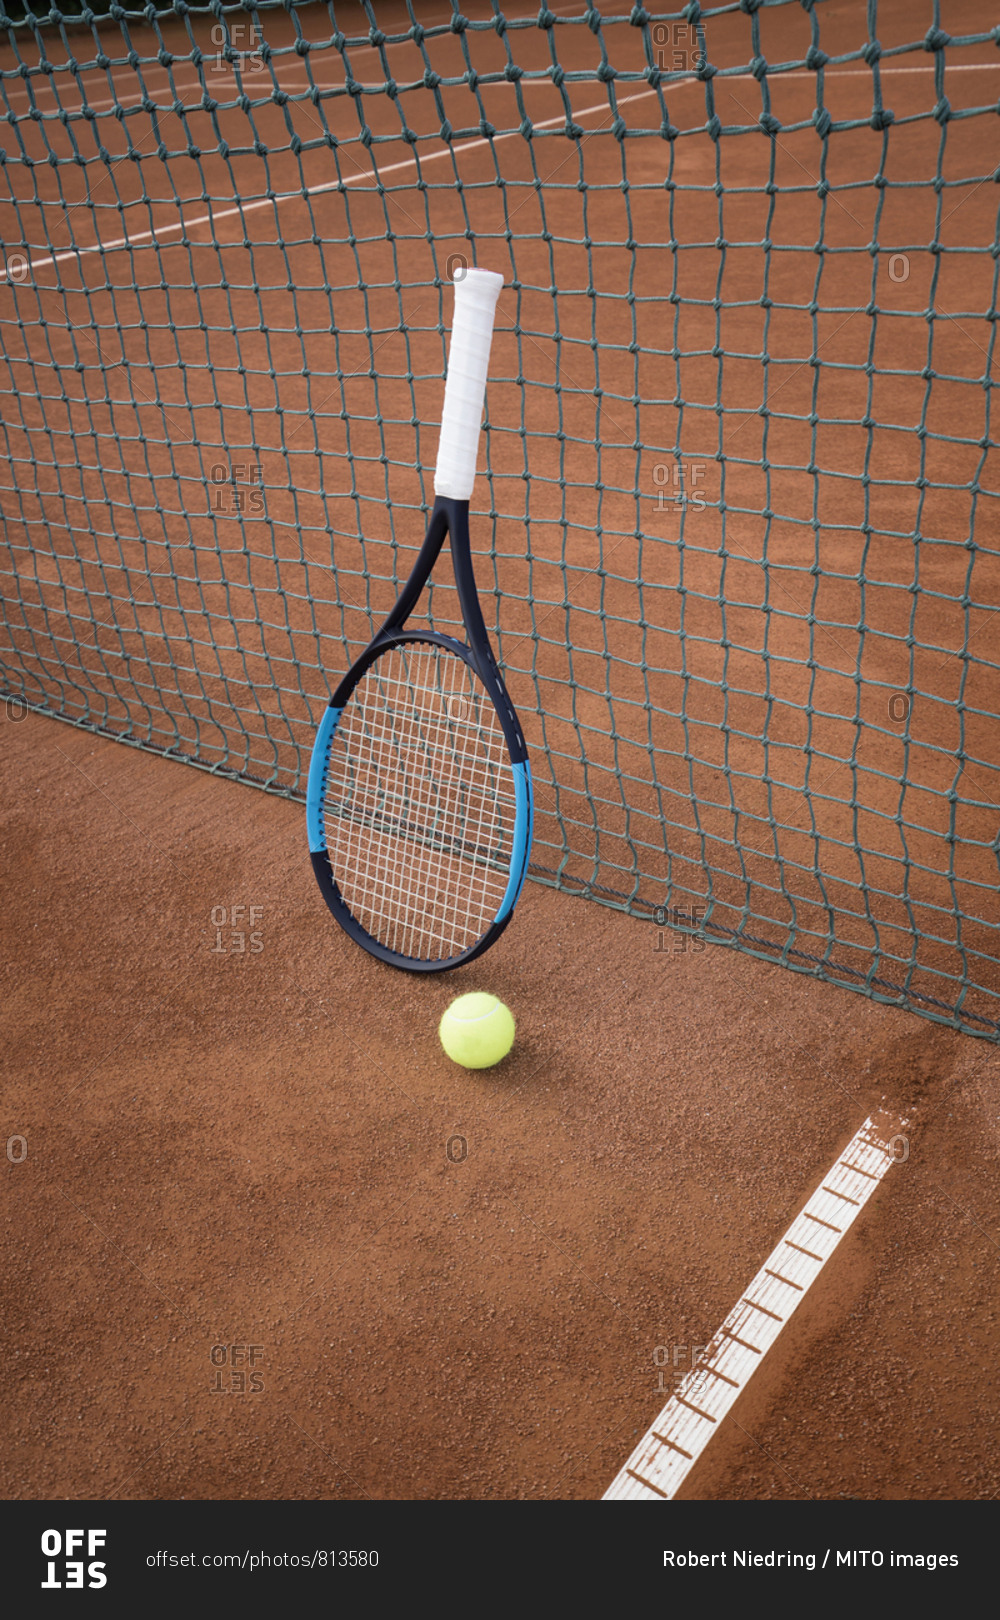 Tennis ball with racket leaning on net of tennis court, Bavaria, Germany